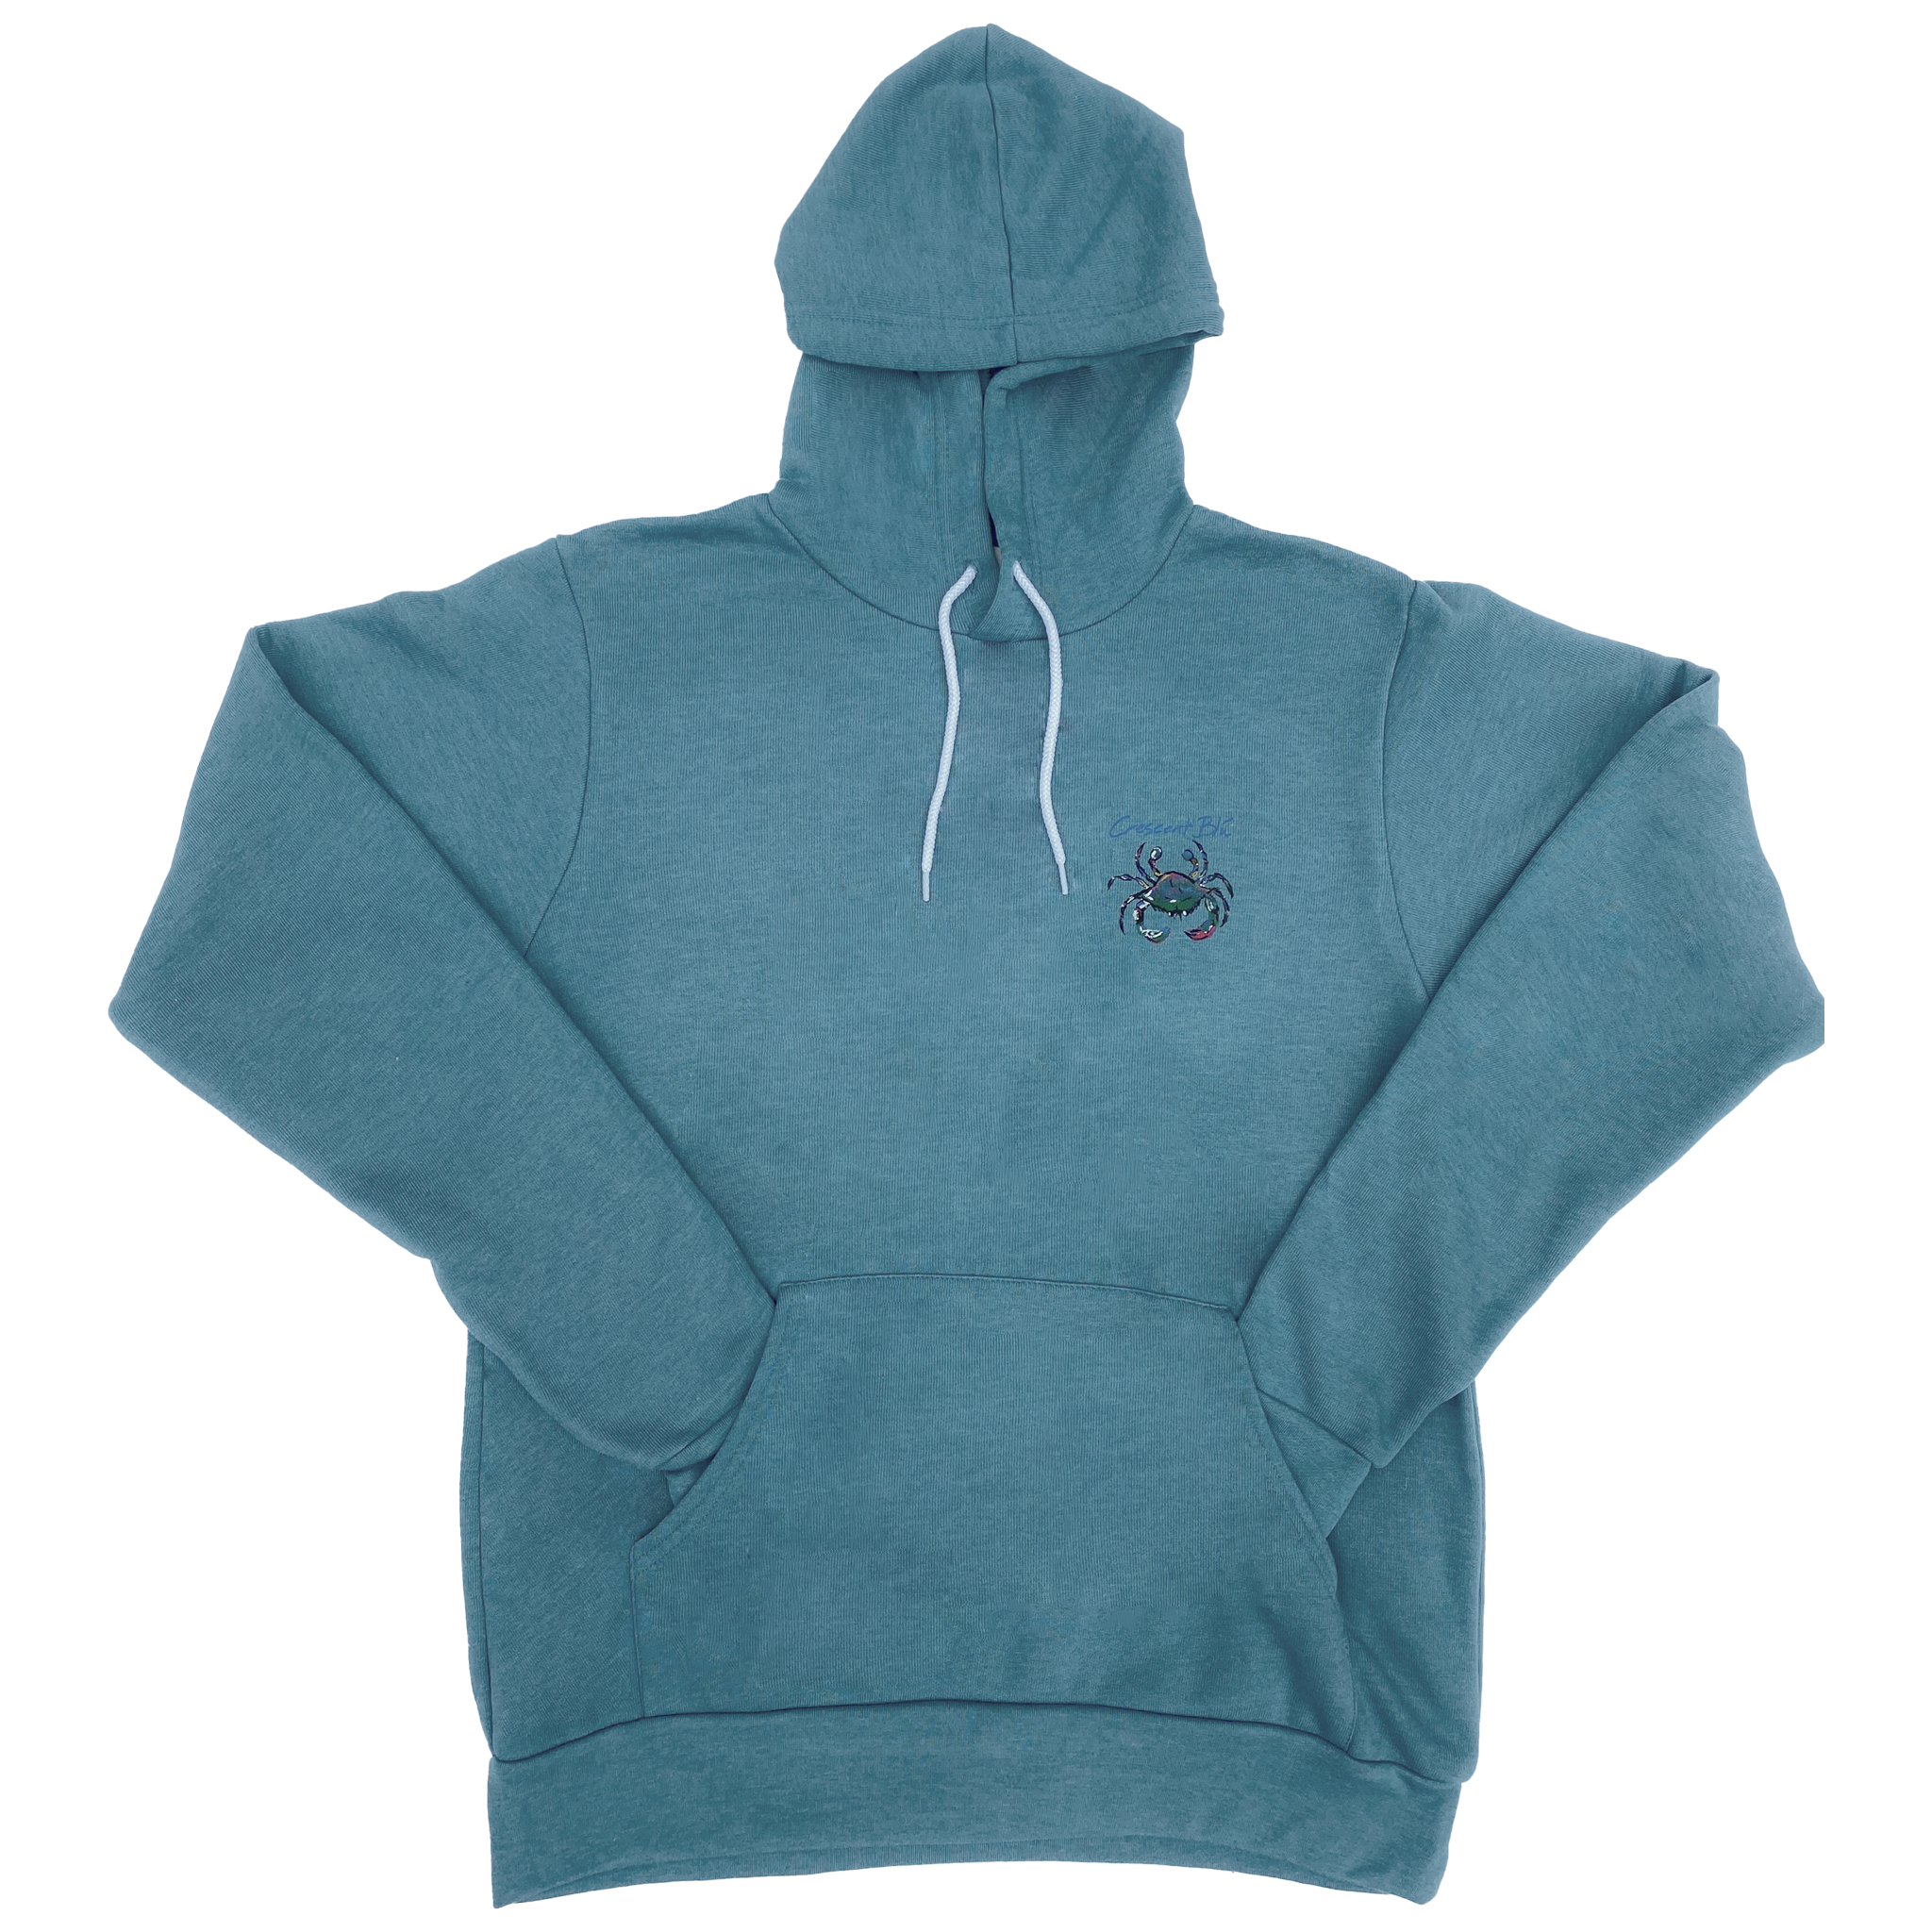 View of the front of a Deep Heather Teal Adult Hoodie Sweatshirt with small multi-colored crab logo on the upper left chest. 